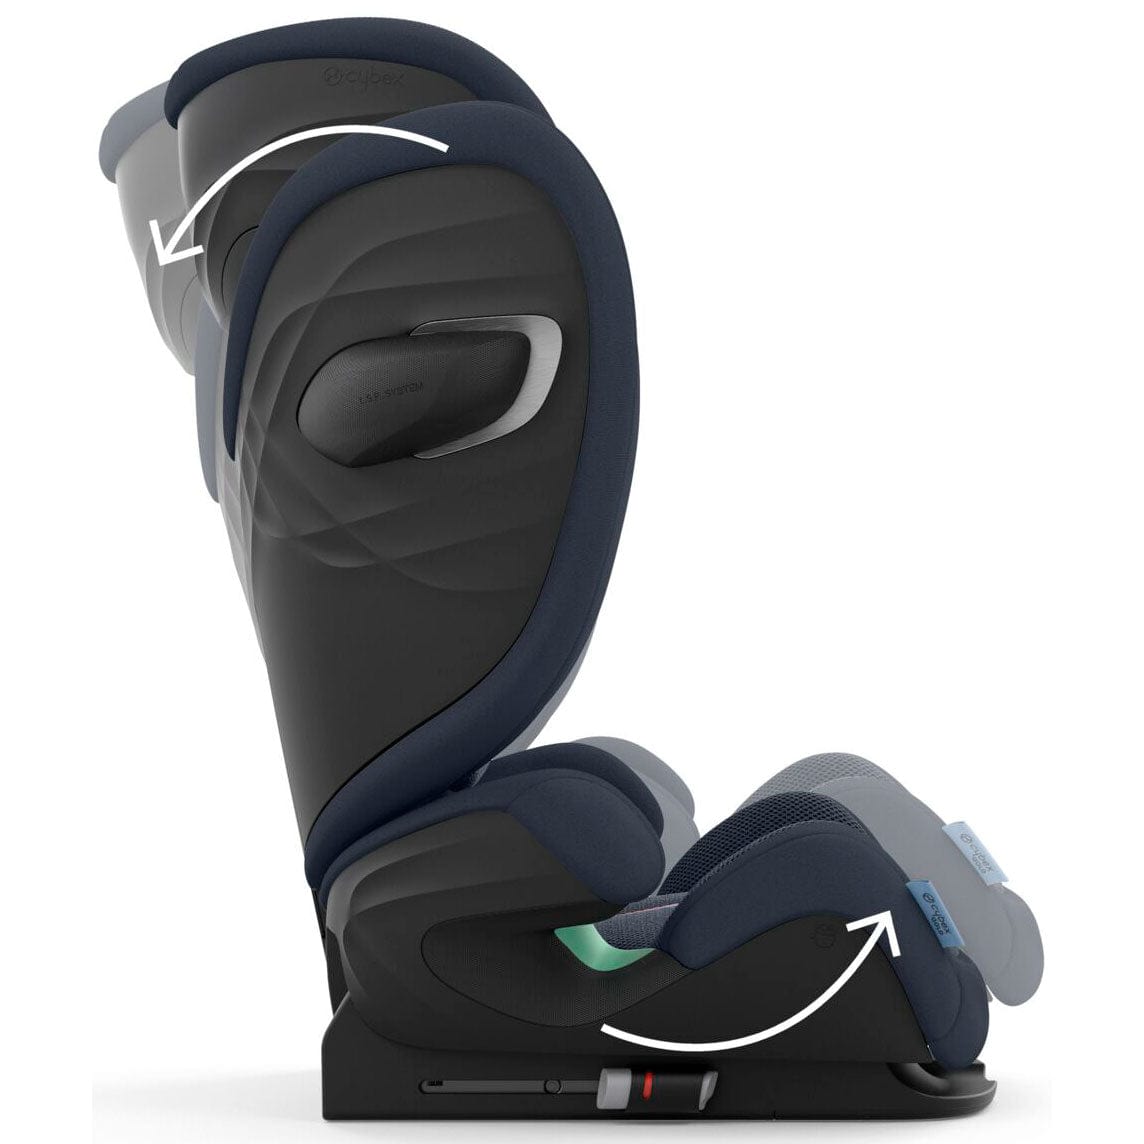 Cybex highback booster seats Cybex Solution G i-Fix Plus Highback Booster in Ocean Blue